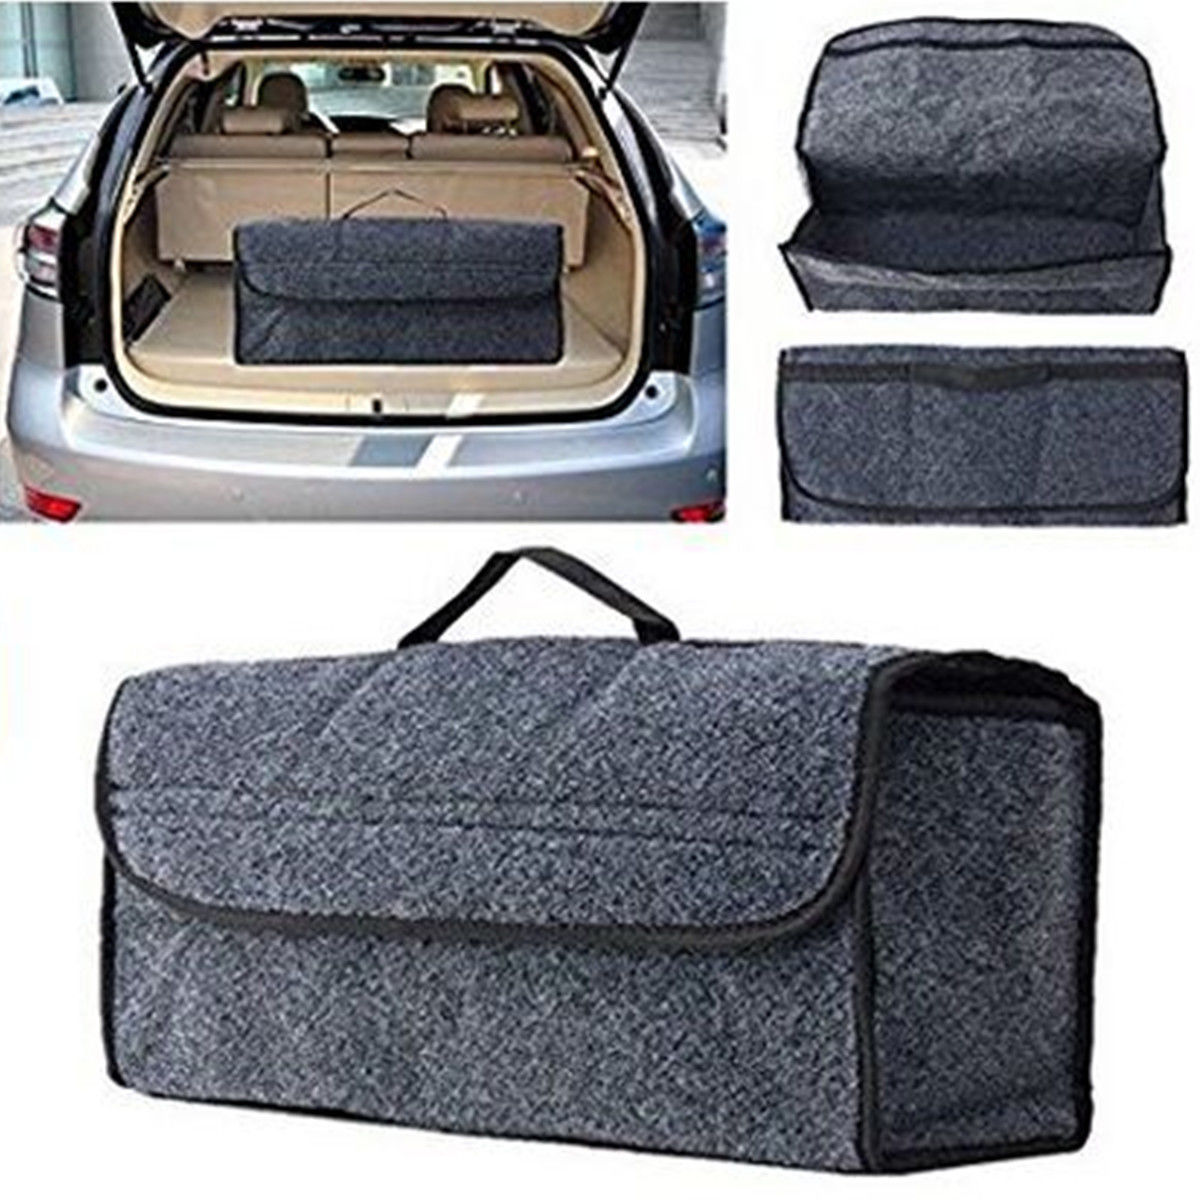 1514981961 268 AwesomeAmazingGreat Zone Tech Multipurpose Cargo Trunk Organizer Car SUV Storage Console Collapsible 2018 